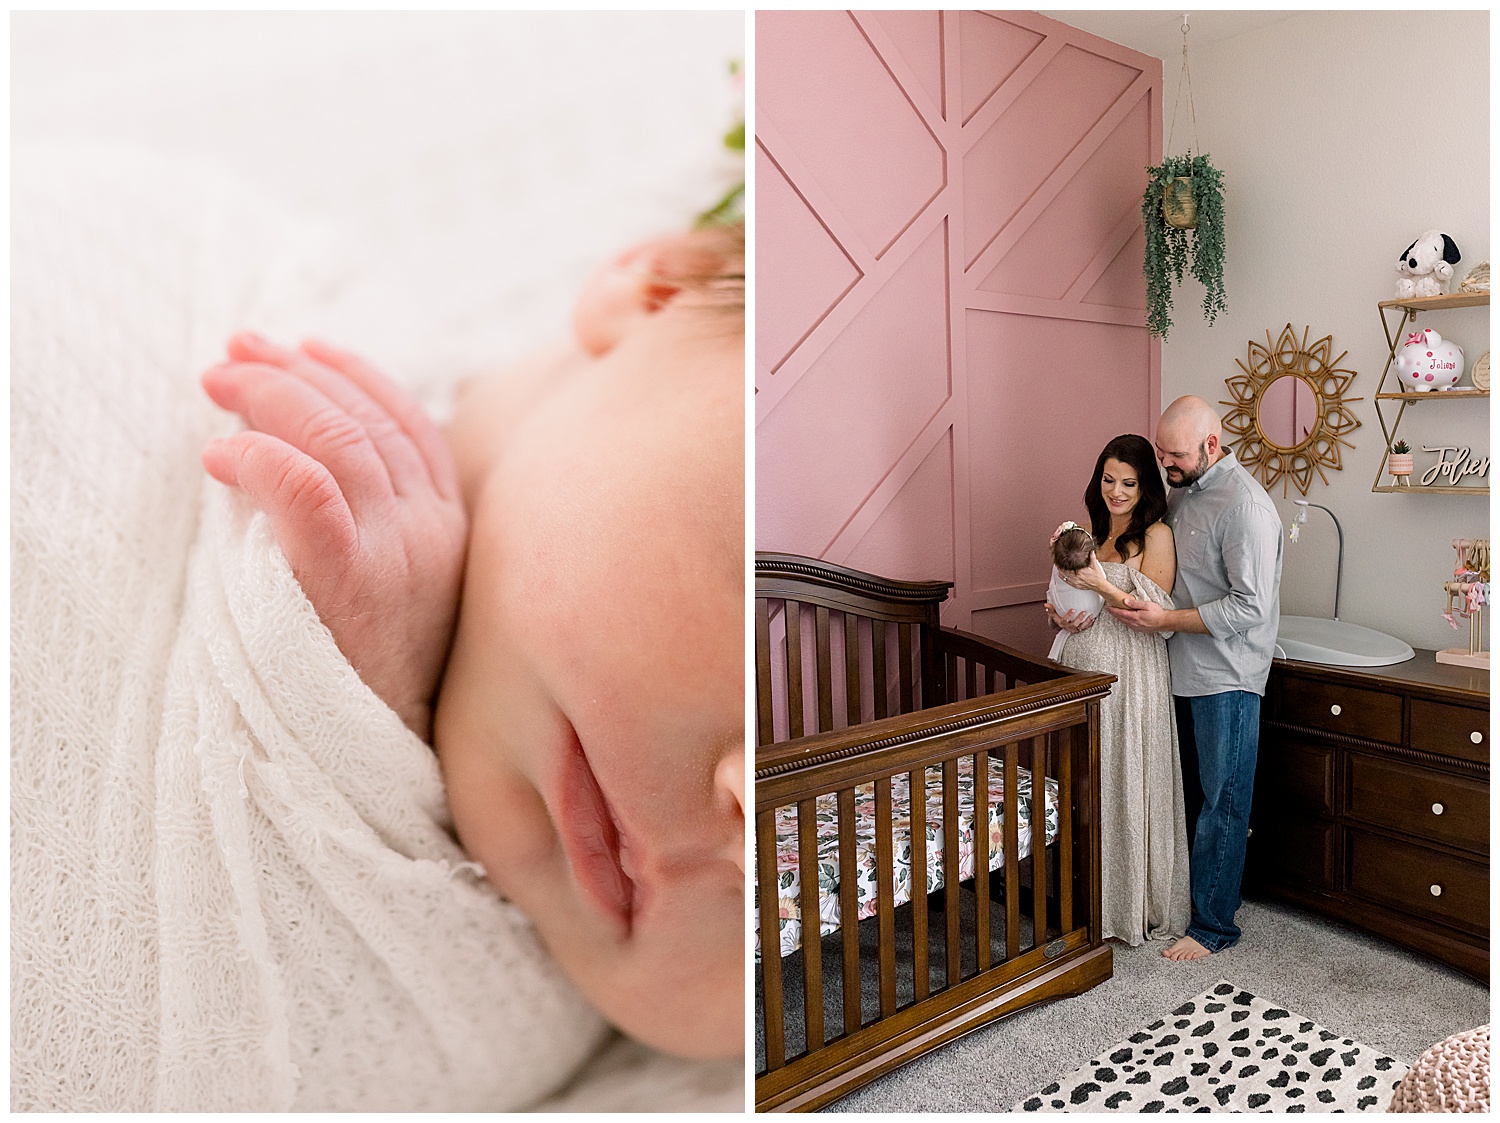 Details of baby's hands during arizona lifestyle newborn session, pink and neutral nursery for rainbow baby girl